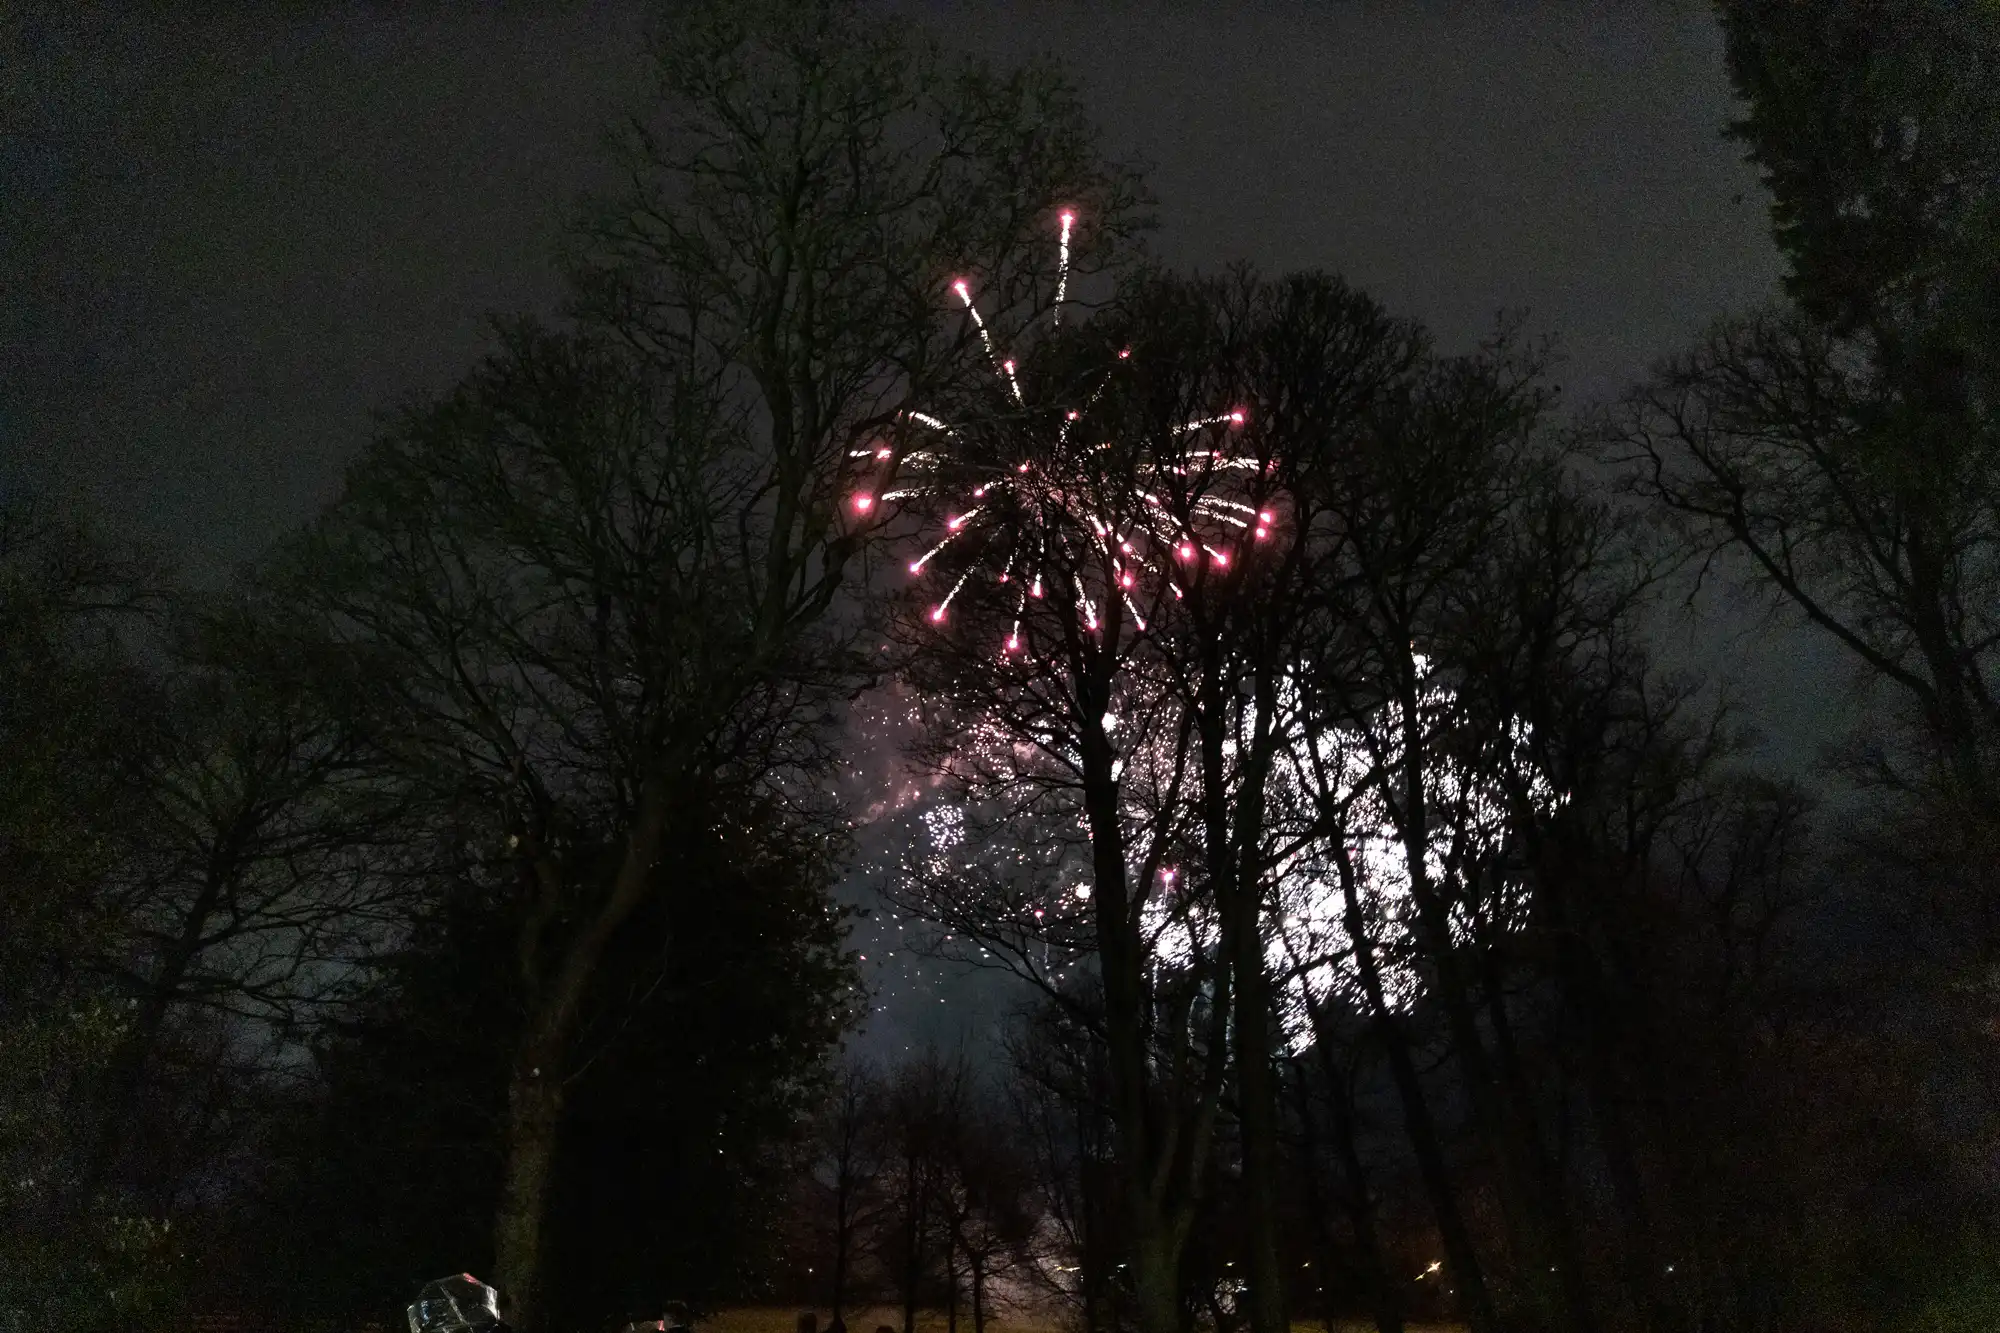 Fireworks light up the night sky, visible through the silhouettes of tall, leafless trees.